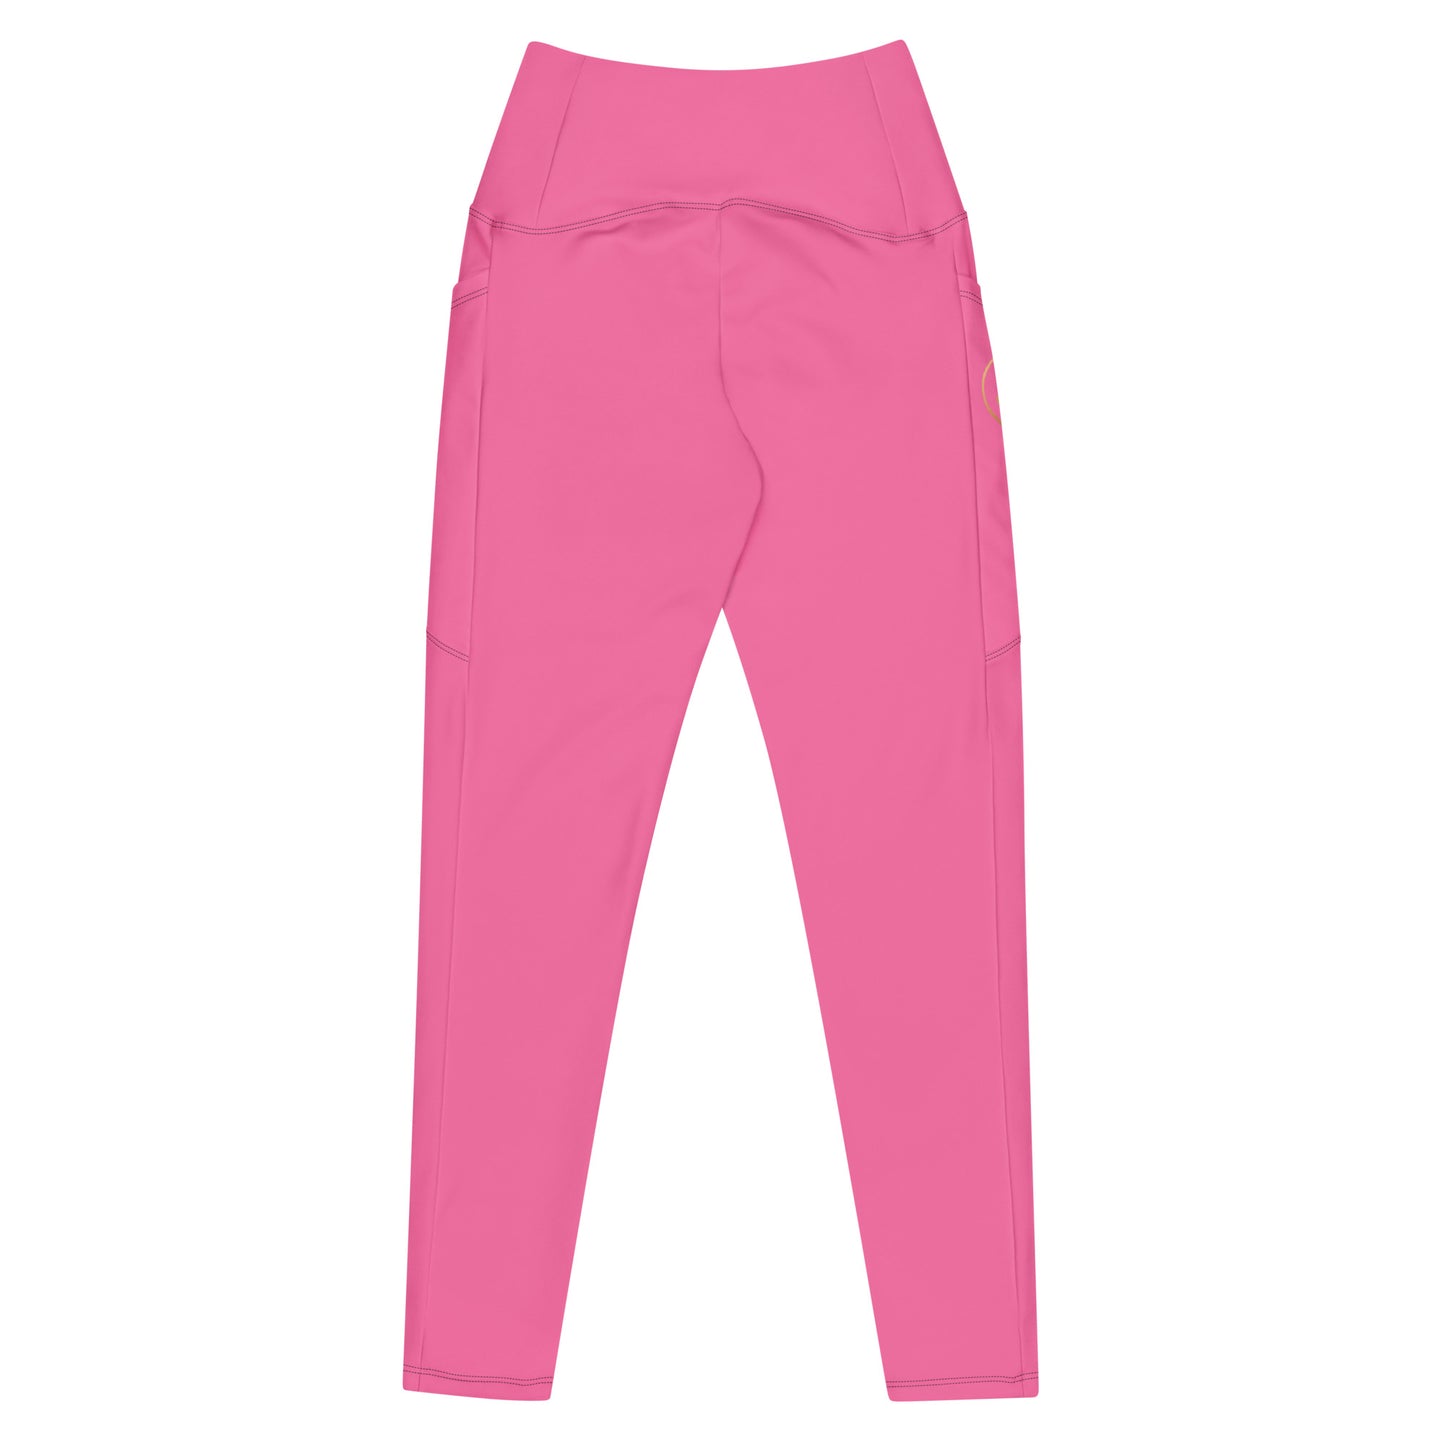 Pink Leggings with Pockets